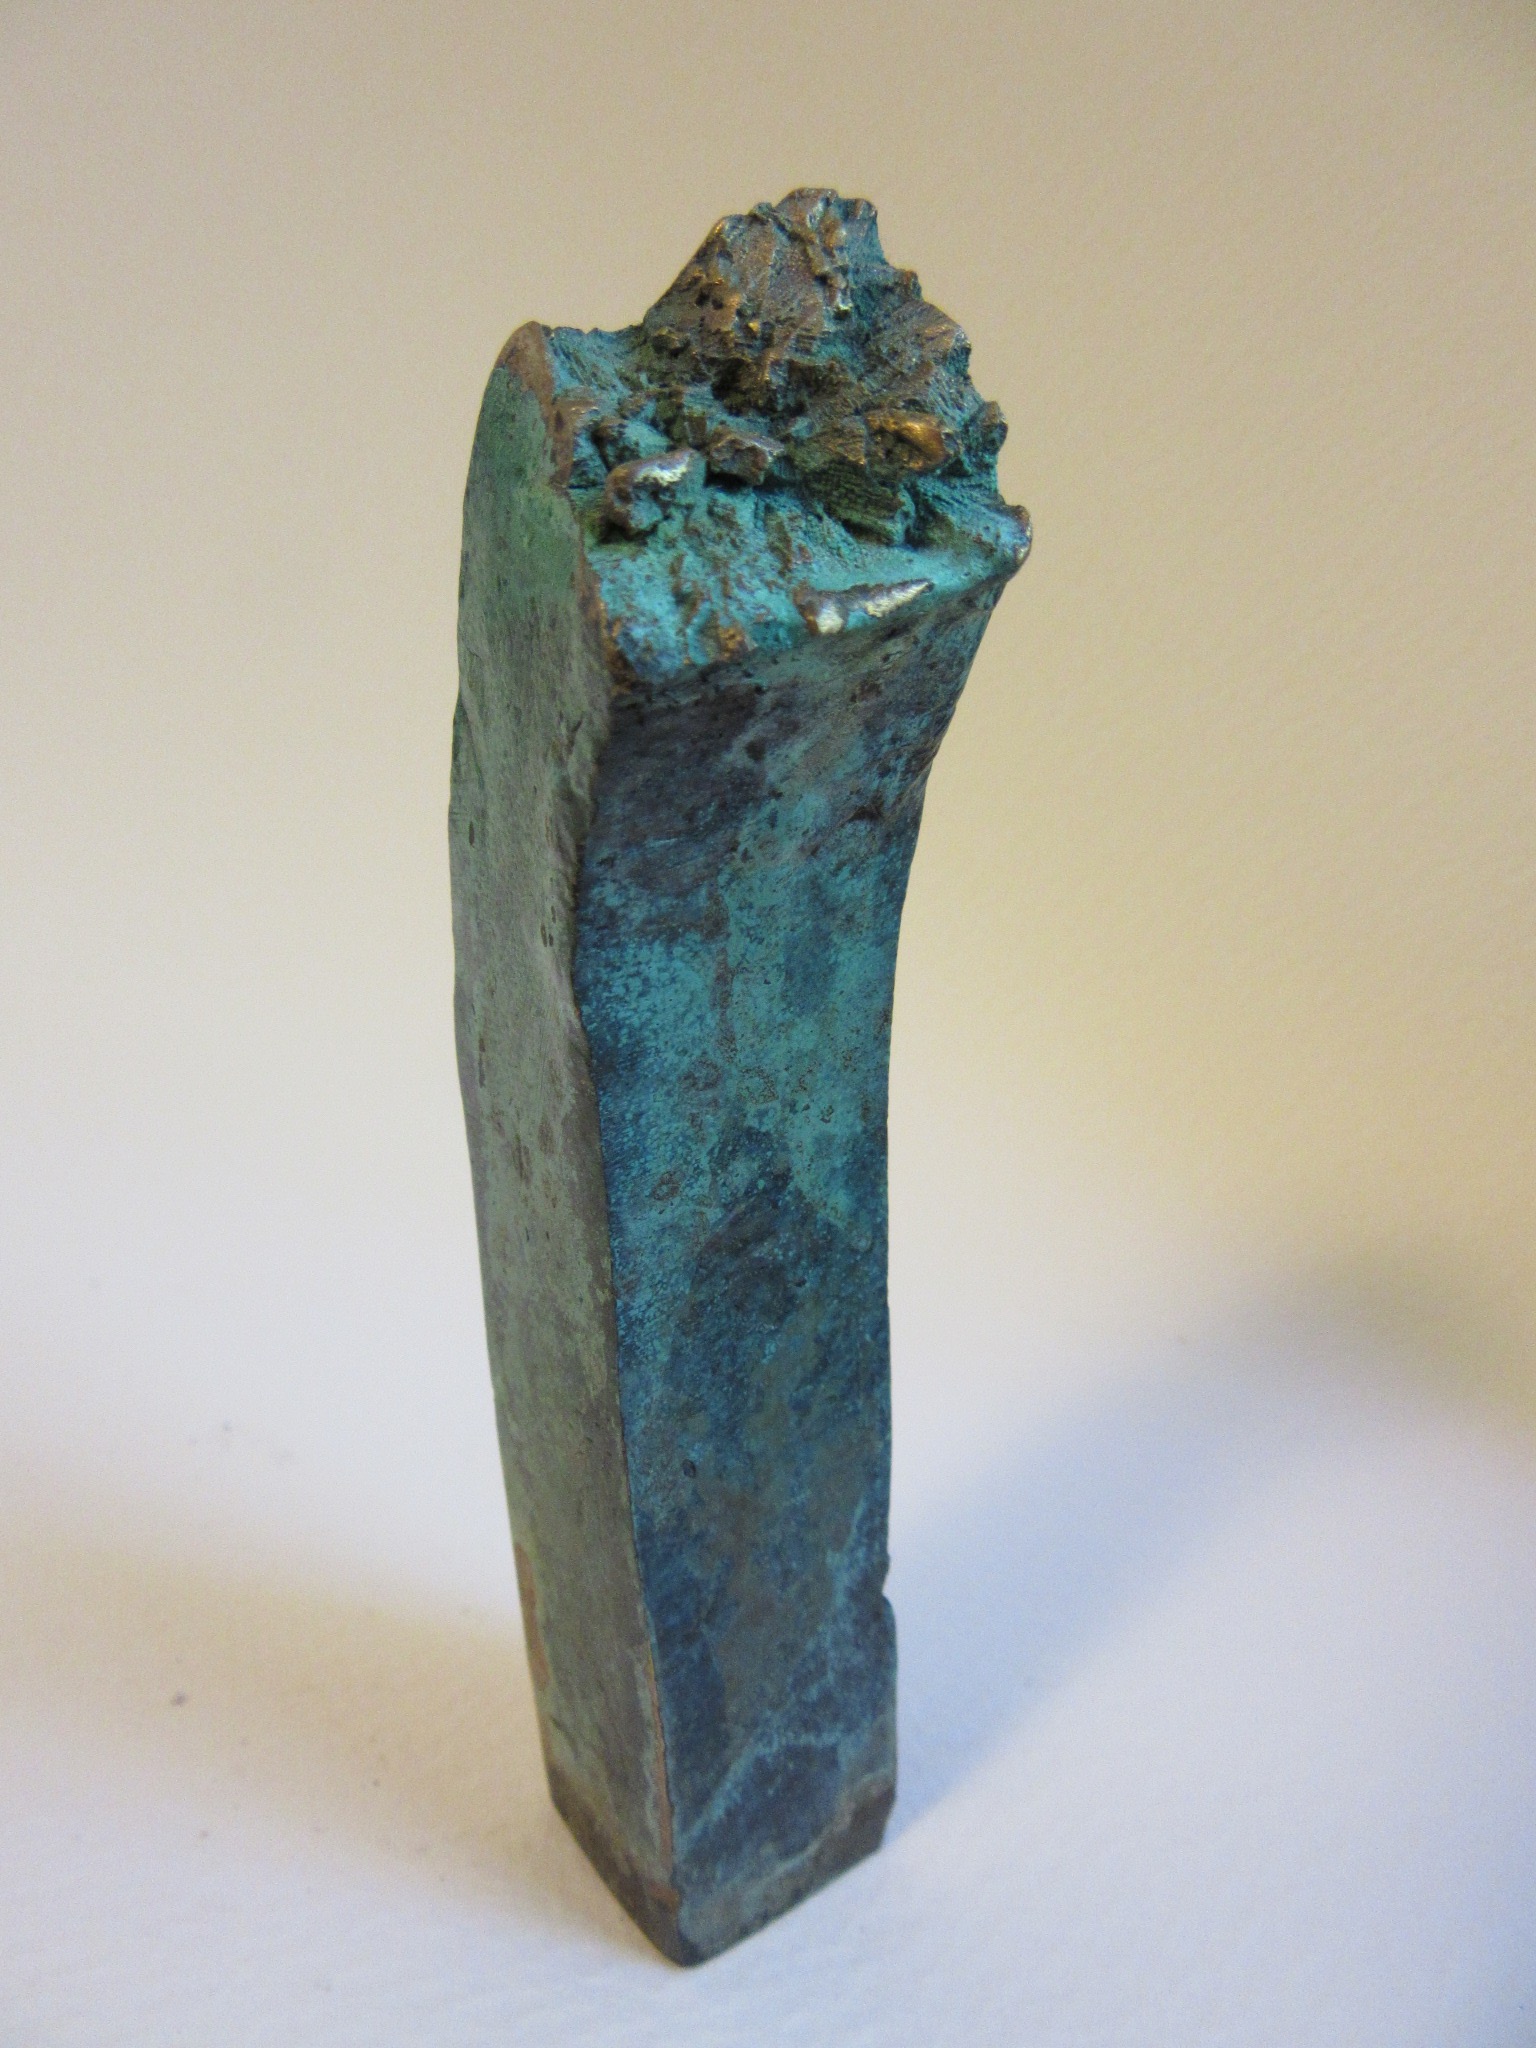   Untitled , bronze 4" x 1" Gifted 